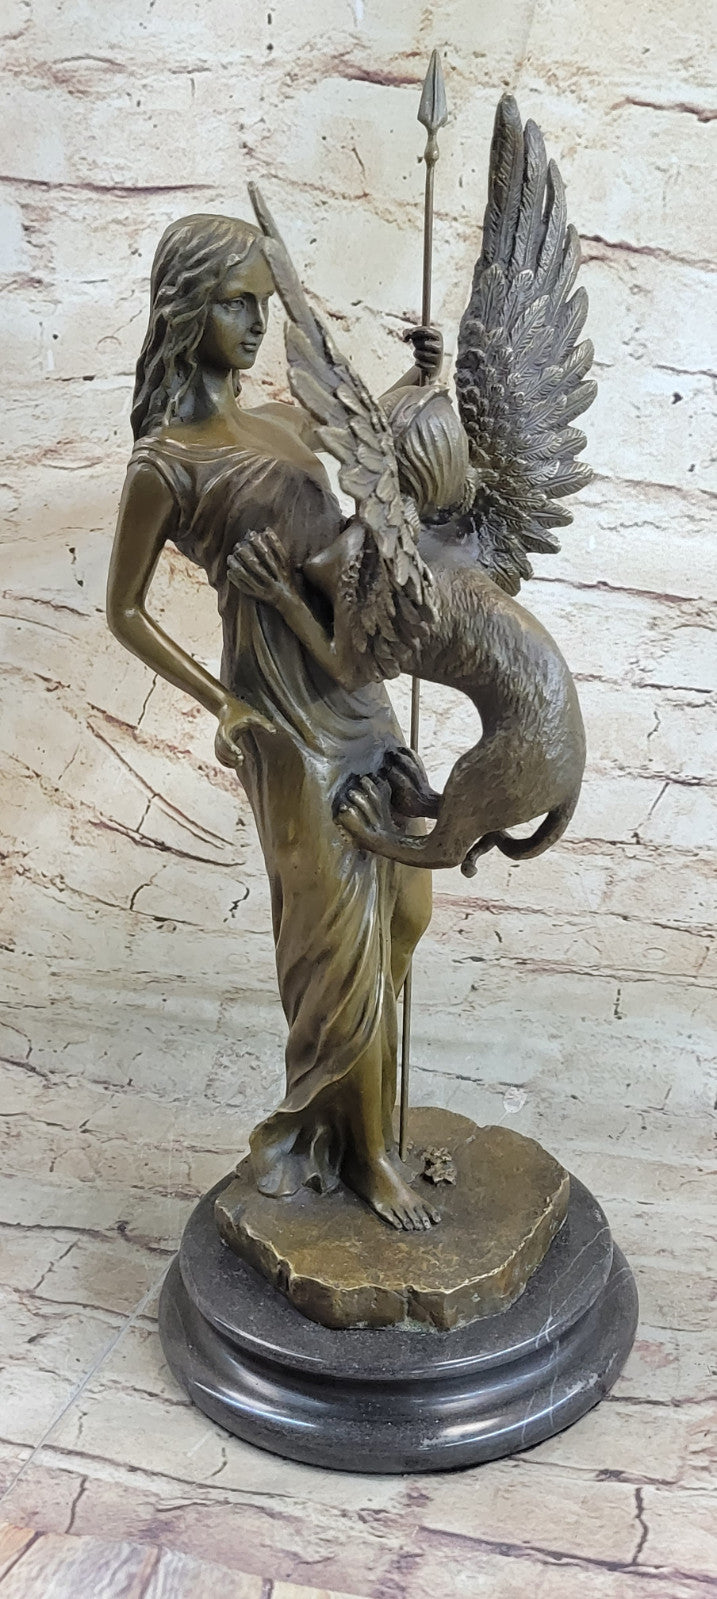 1920s Bronze Large Winged Griffin Art-Deco Home Decor Table Top- Magnificent!